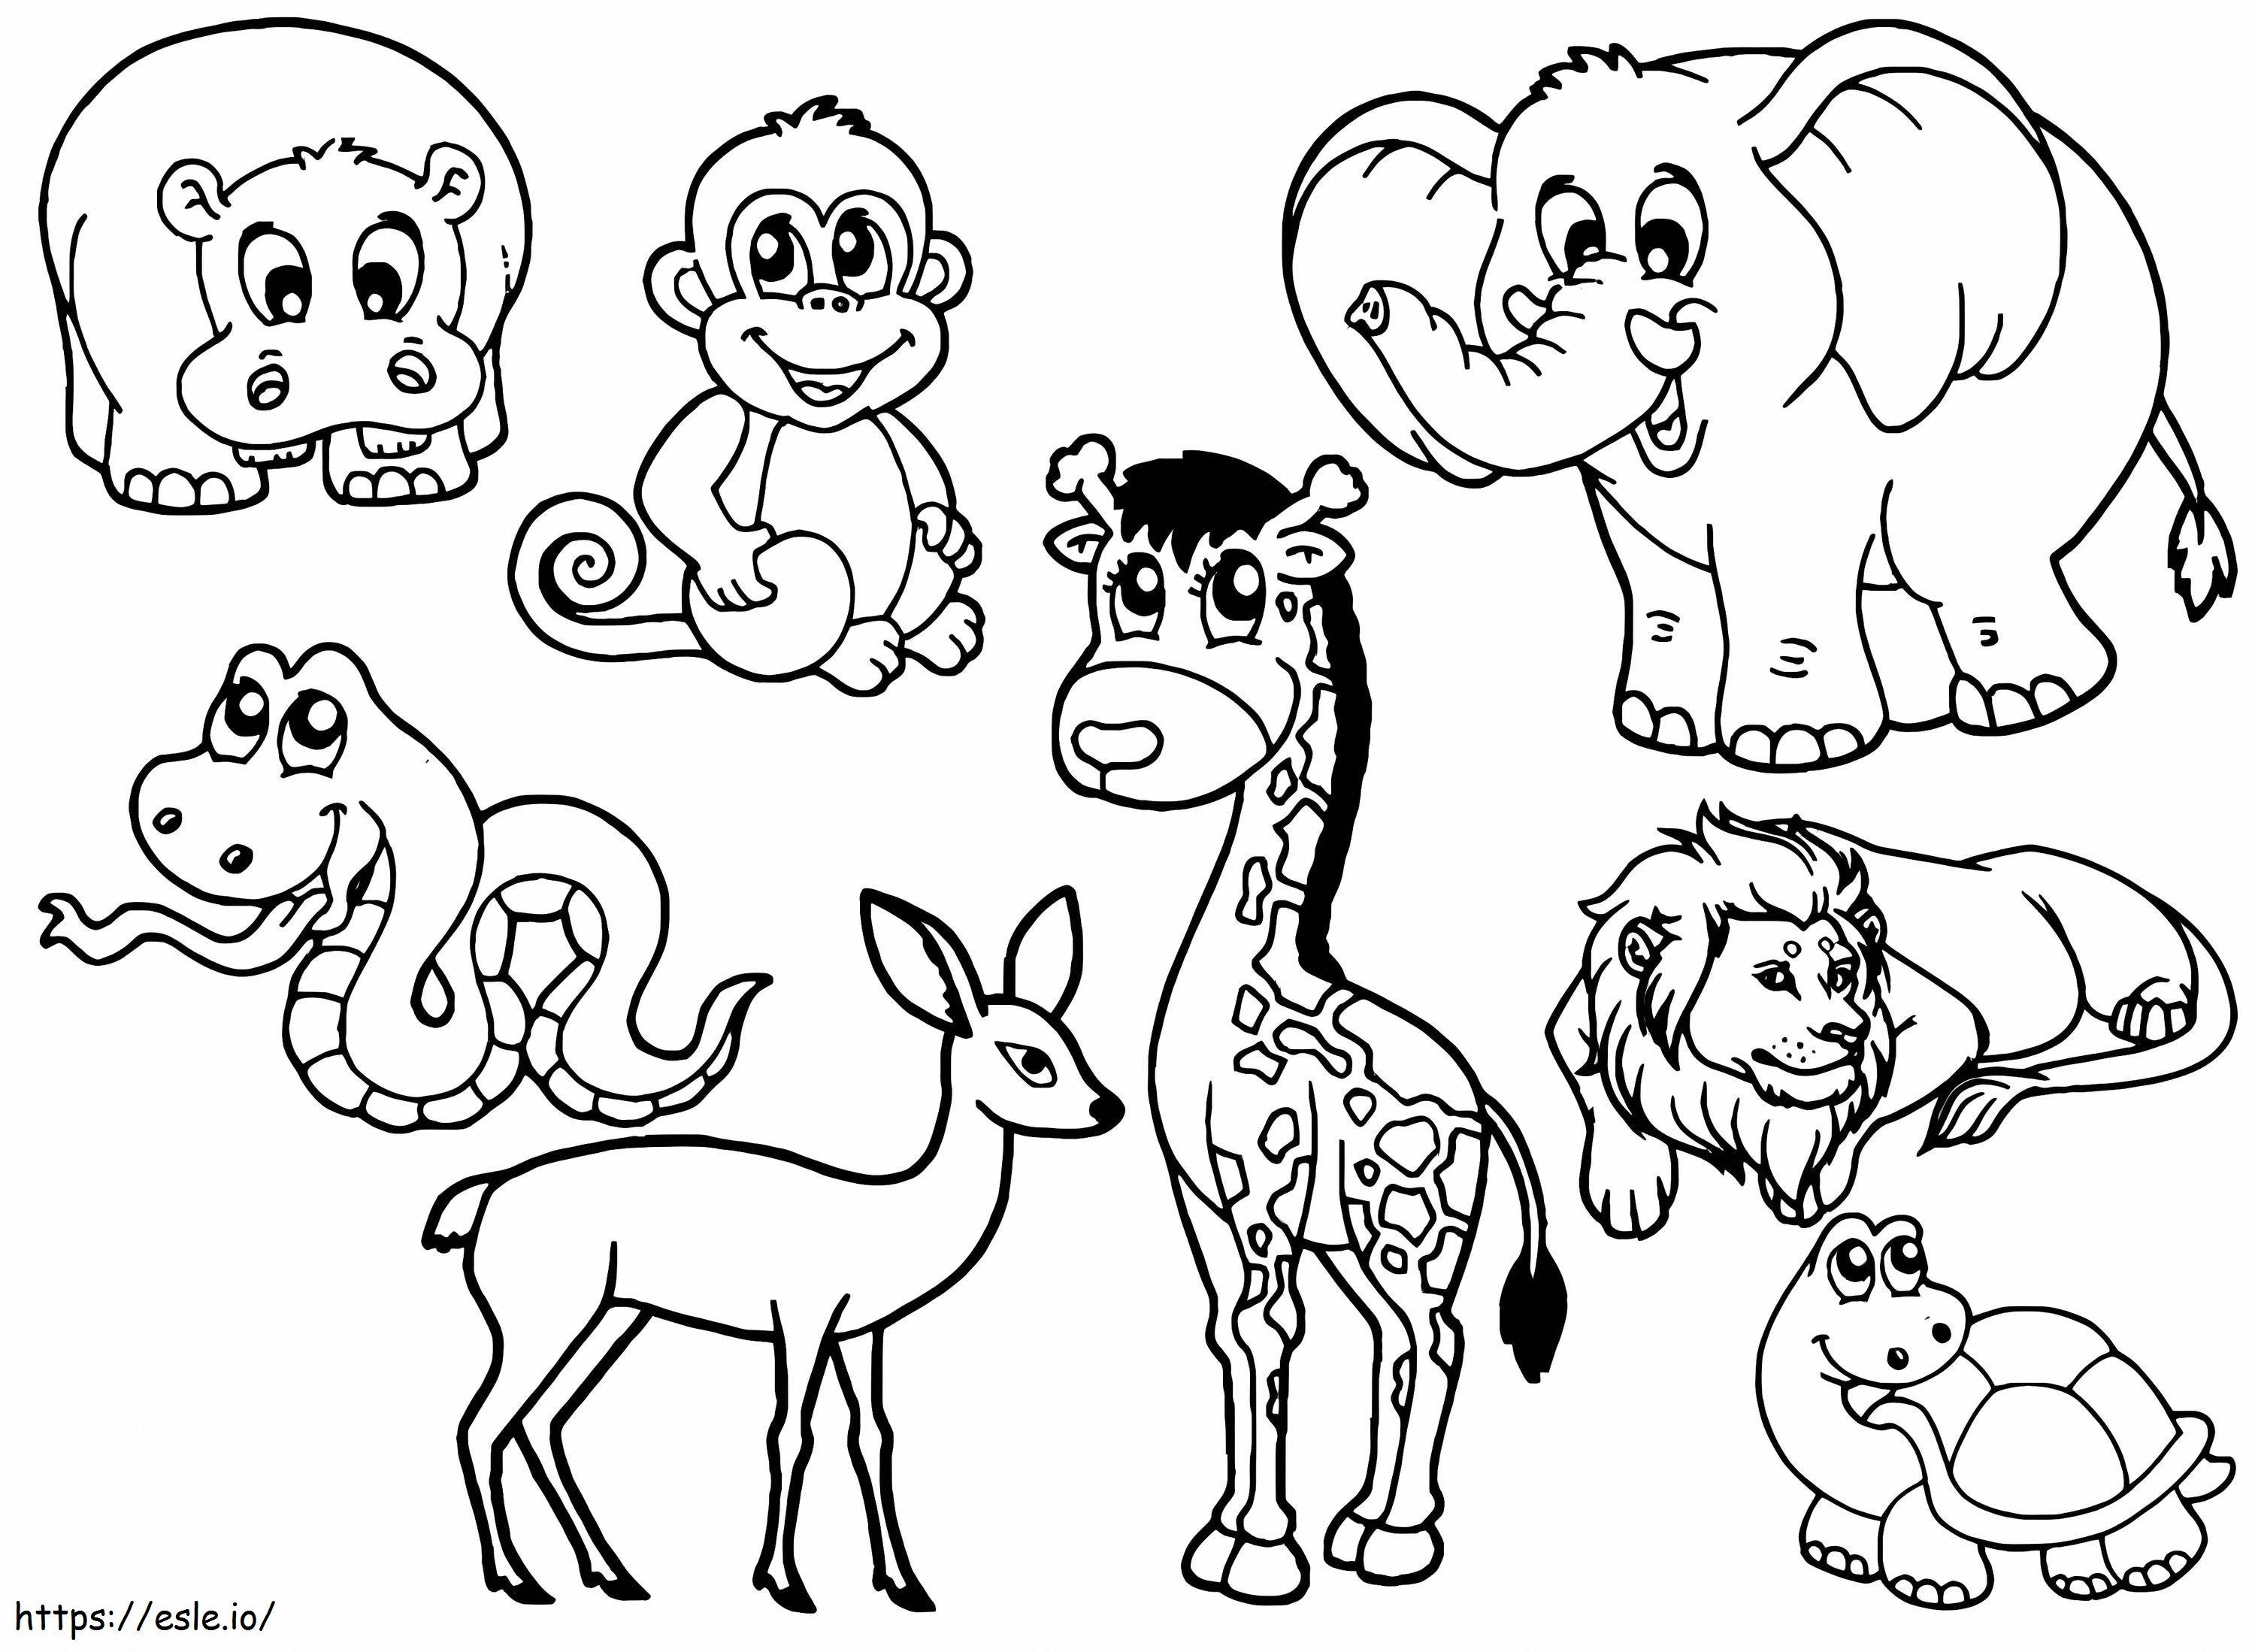 Lovely Zoo Animals coloring page